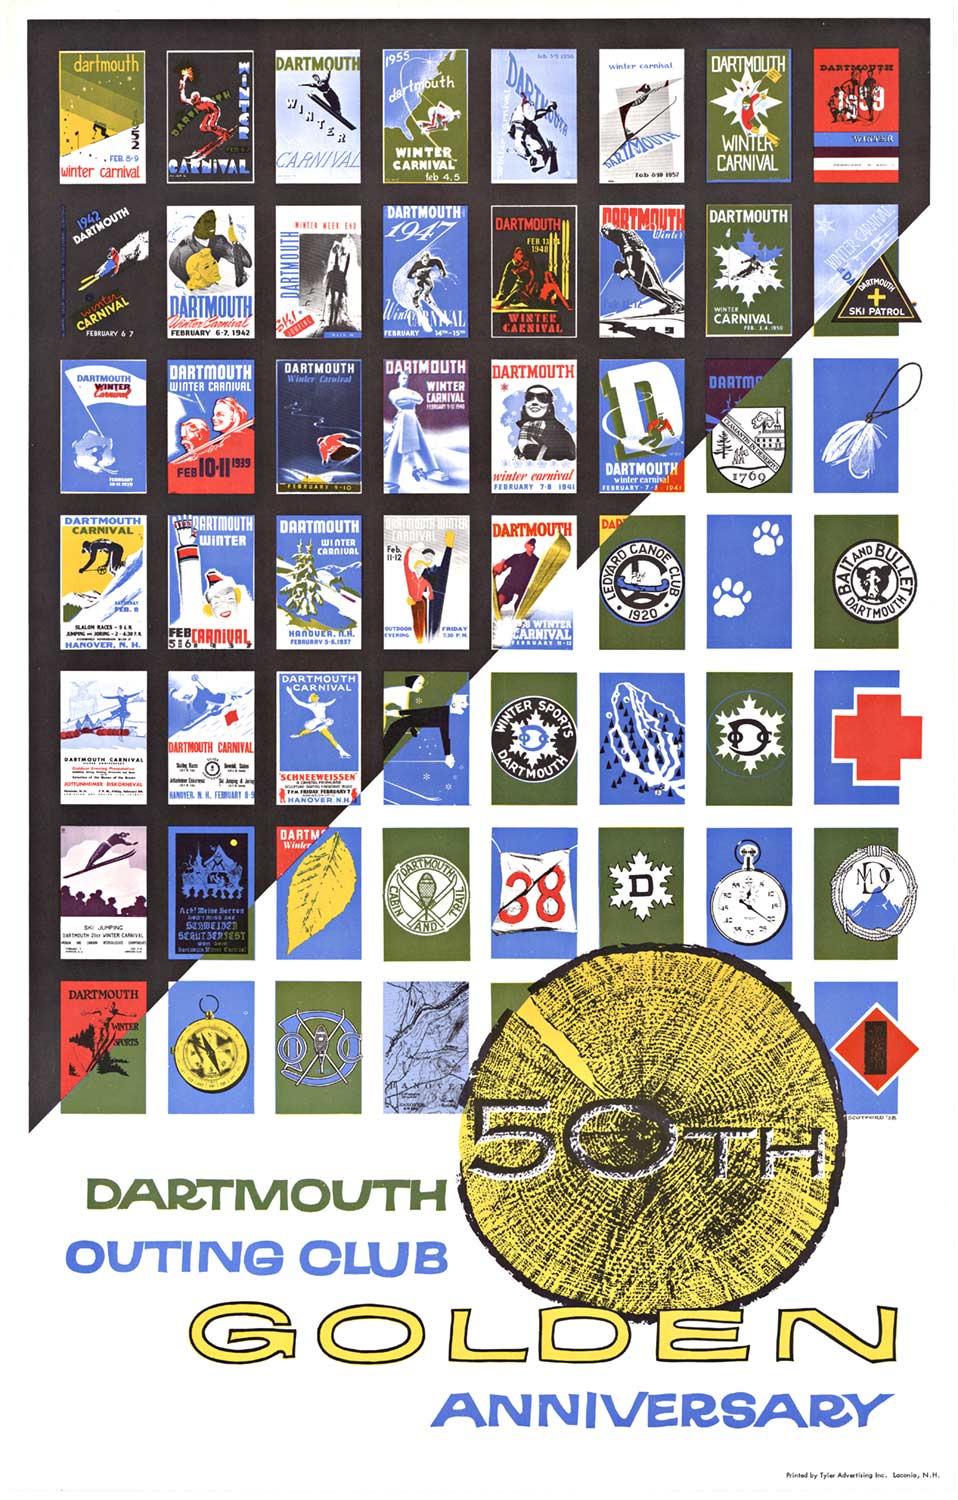 Original Dartmouth Outing Club Golden 50th Anniversary. Archivally linen backed in excellent condition, ready to frame. The image on this poster features vignettes of previous 50 posters created for the Dartmouth ski club. Printed by Tyler Advertising